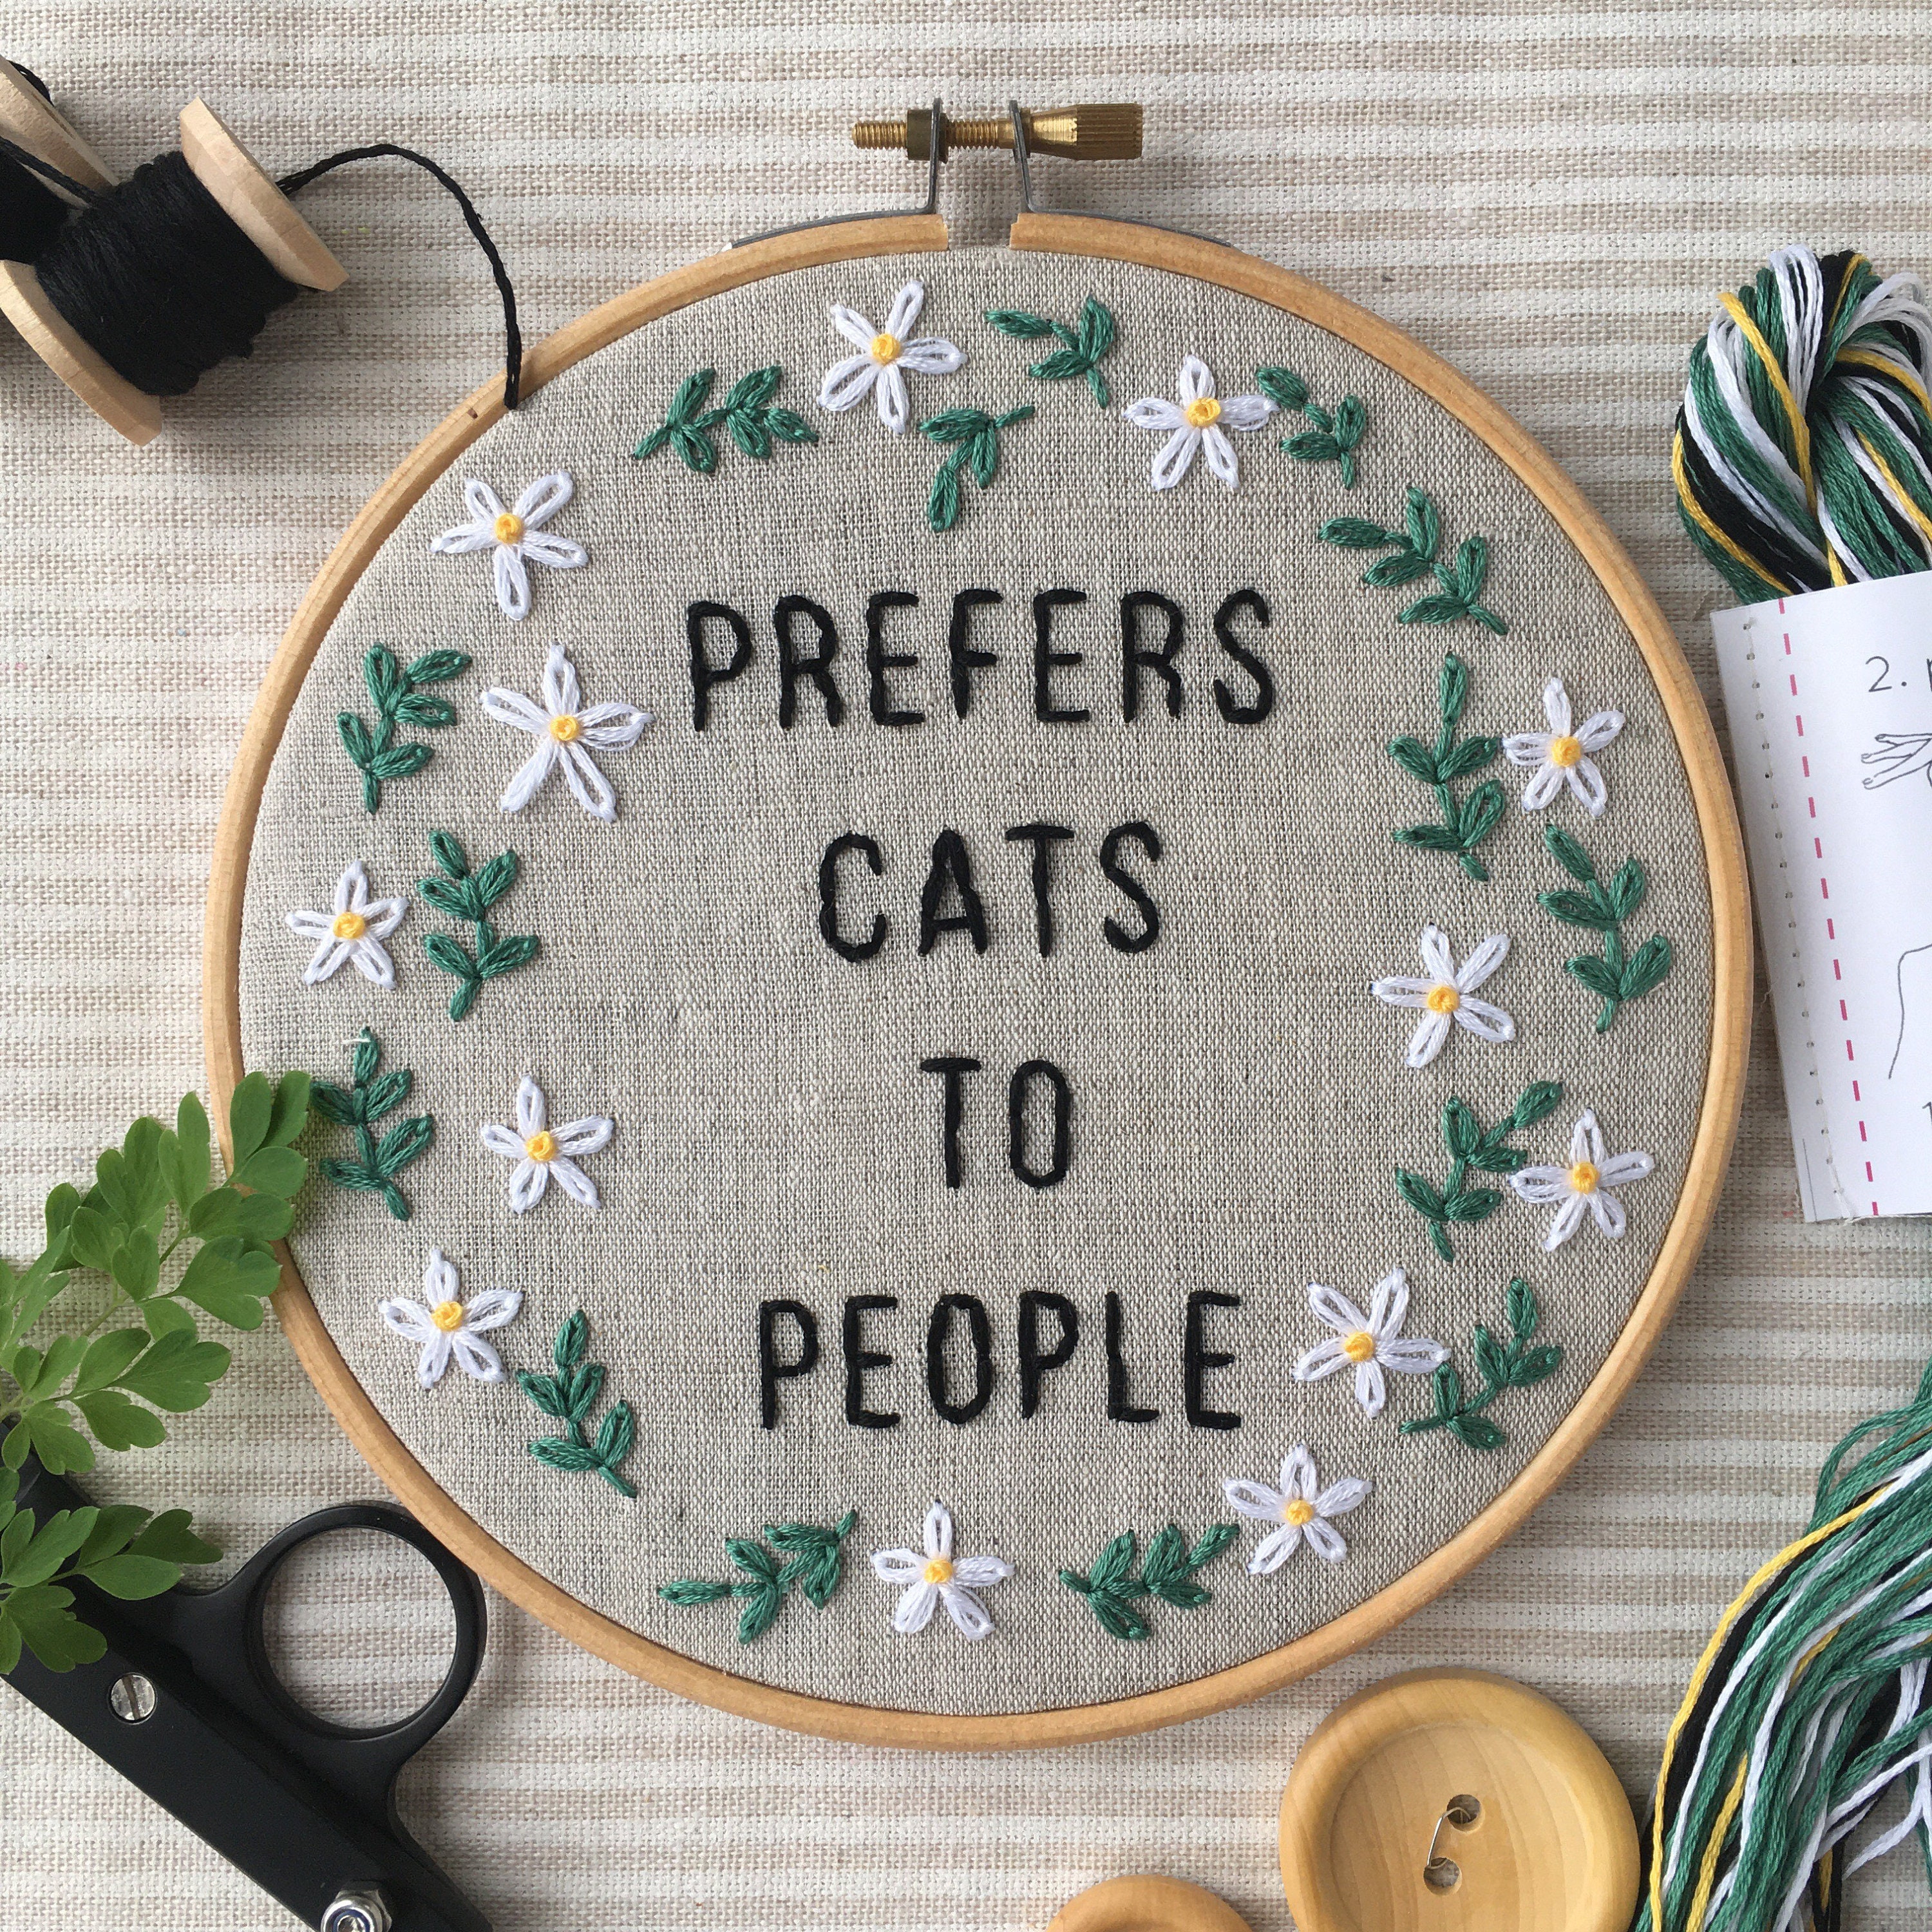 Cat Lover Gift: Sarcastic, Funny Embroidery Kit 